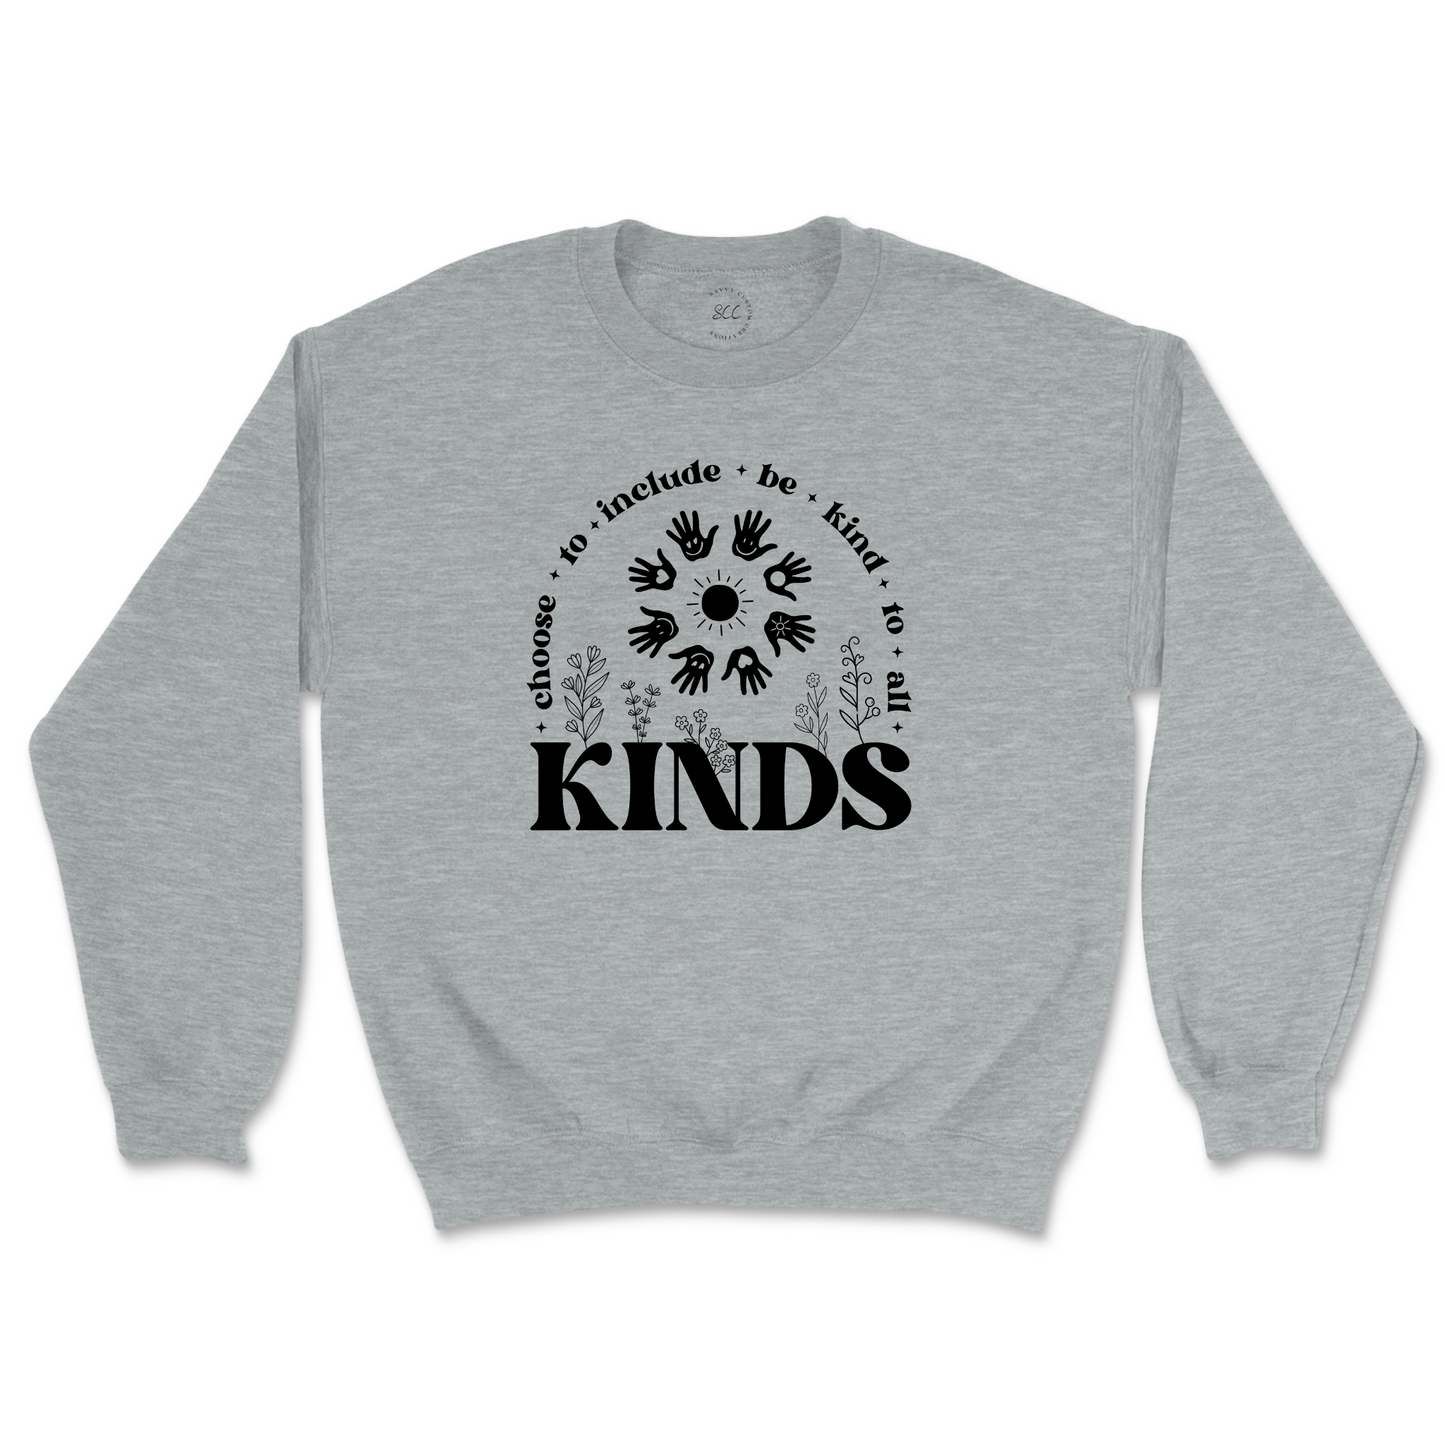 Choose to include, be kind to all KINDS - Unisex Sweatshirt